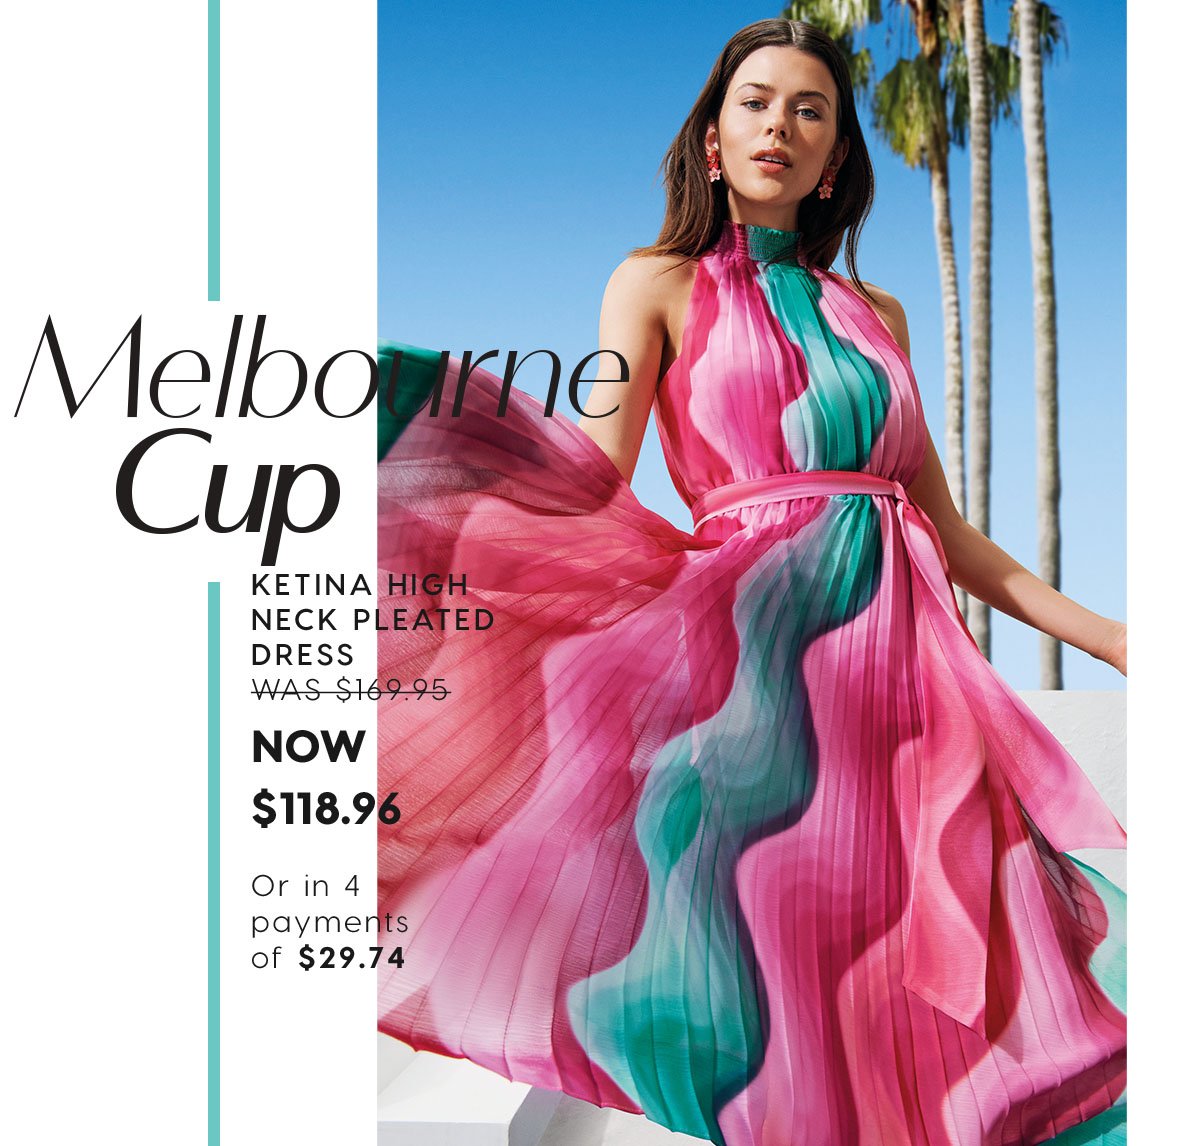 Melbourne Cup. Ketina High Neck Pleated Dress  WAS $169.95 NOW $118.96  Or in 4 payments of $29.74